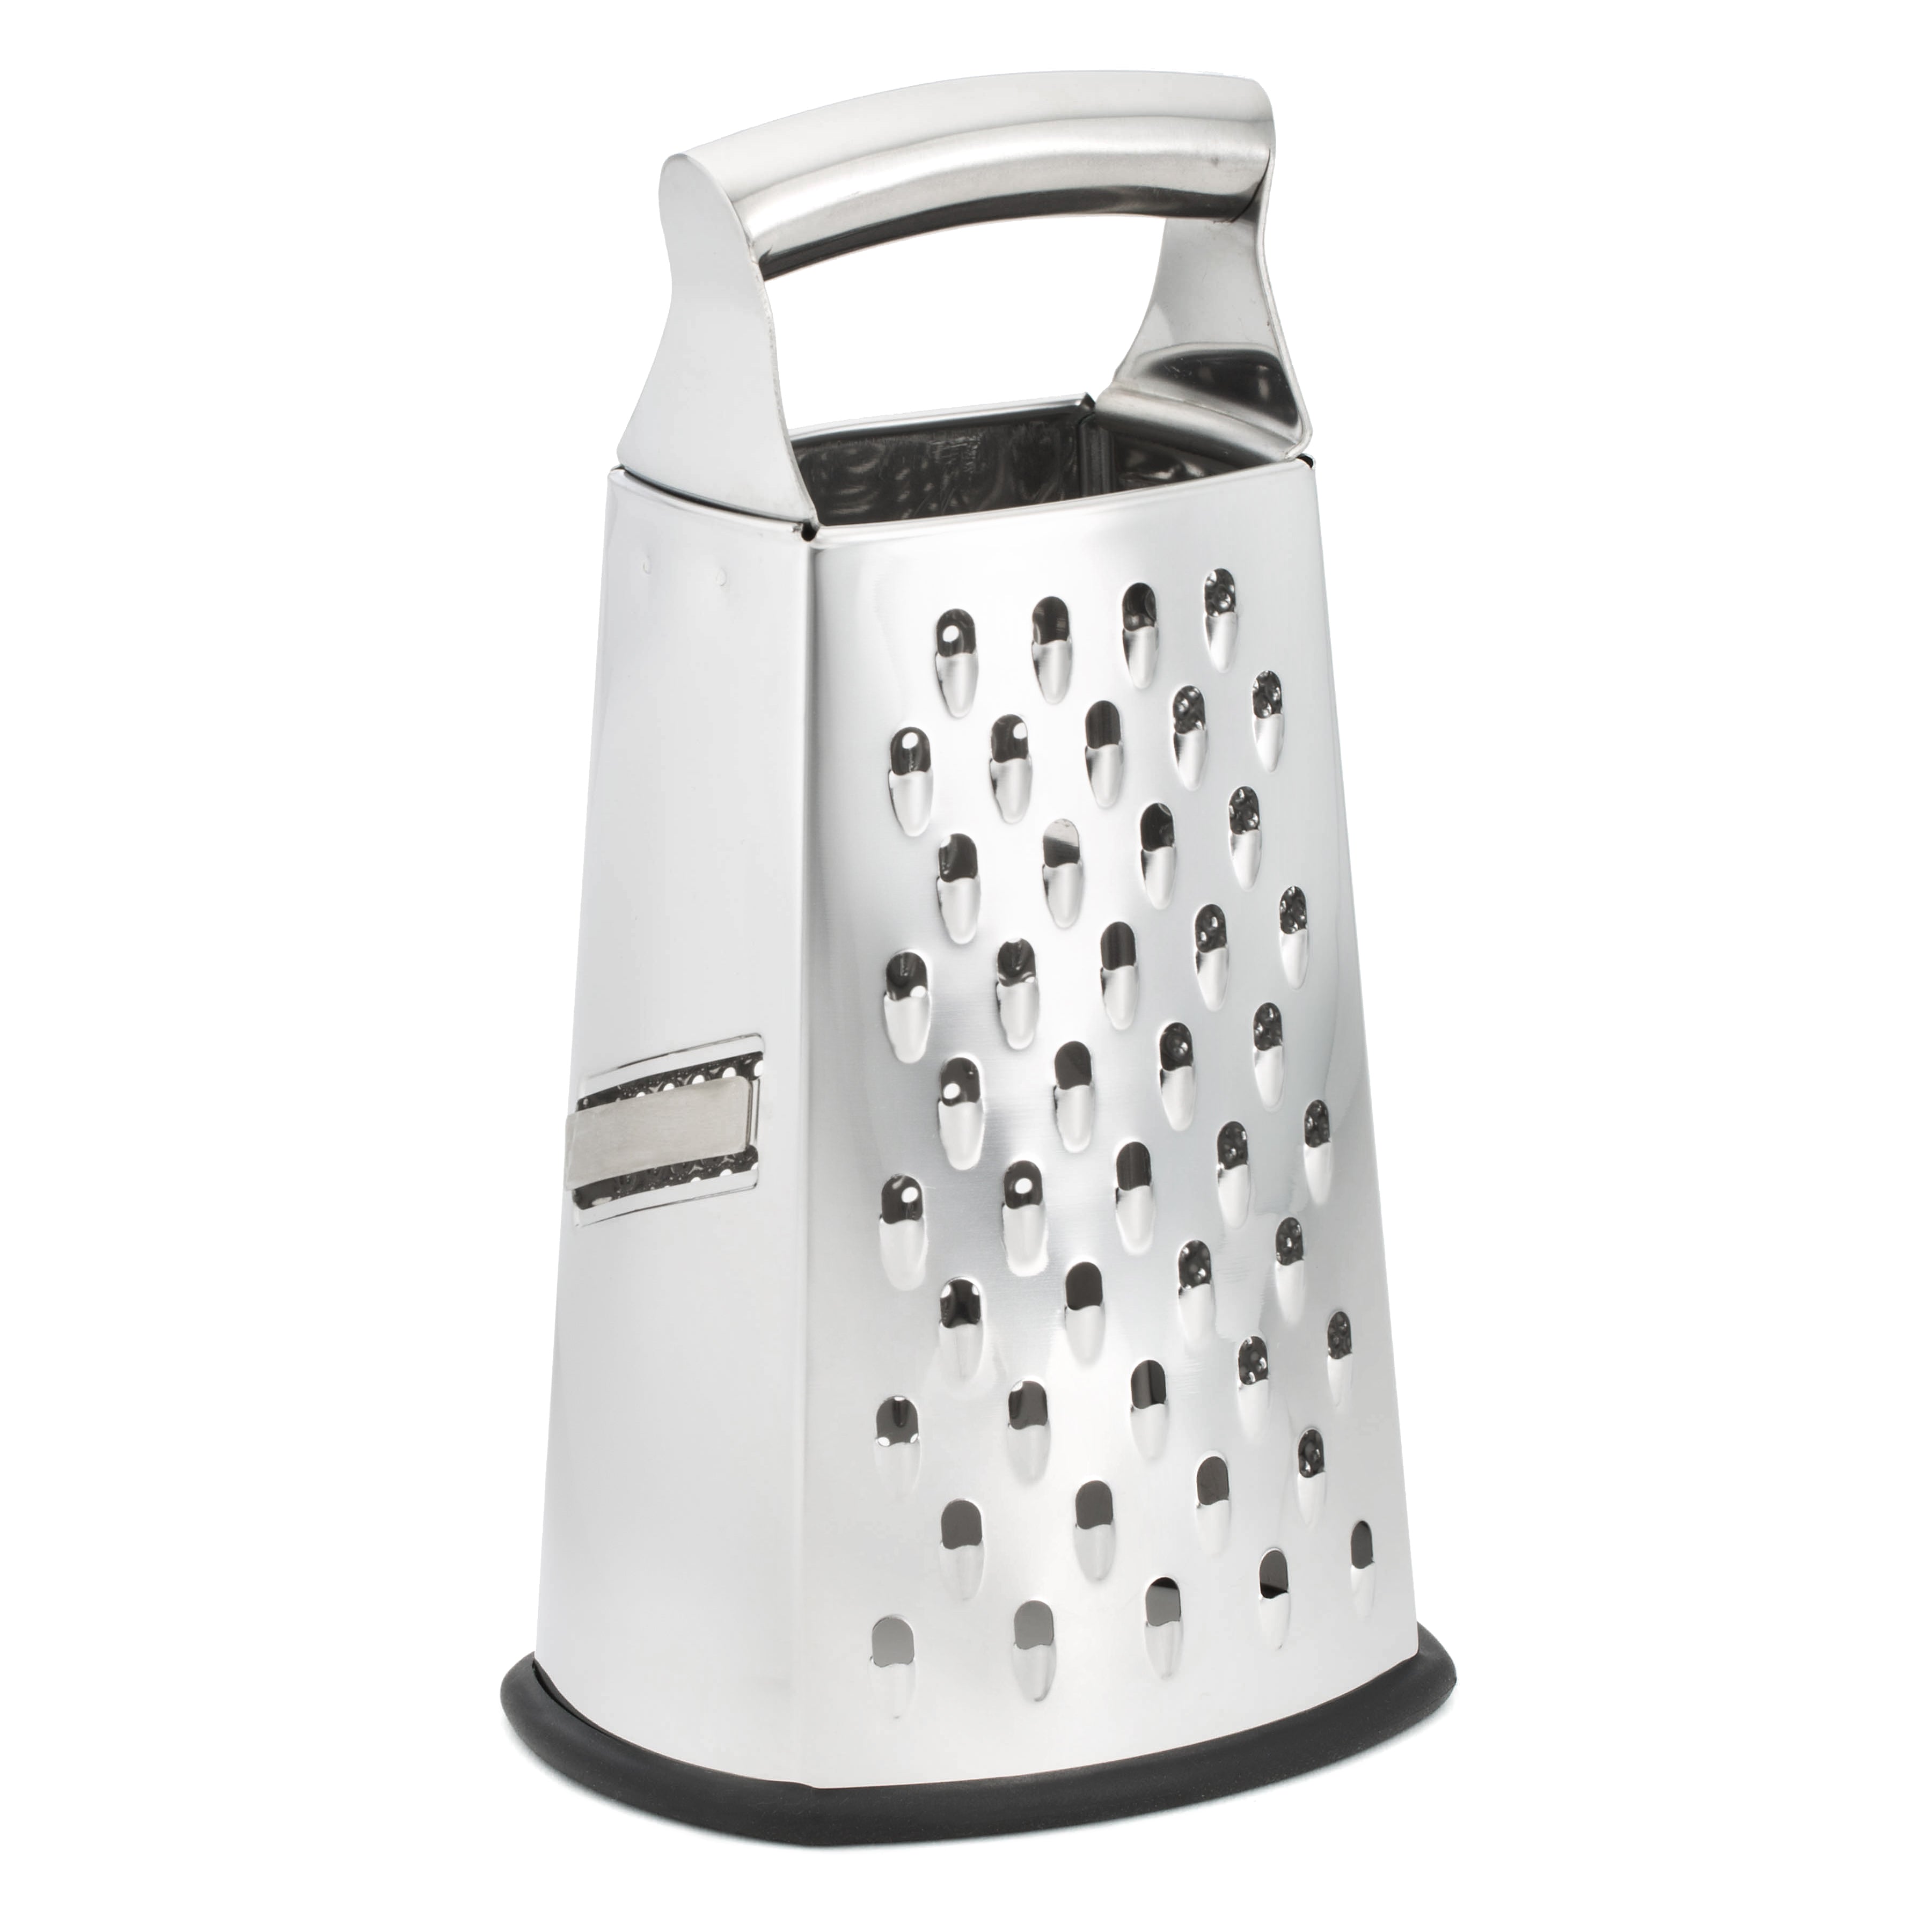  Spring Chef Professional Cheese Grater With Storage Container,  Stainless Steel & Soft Grip Handle, 4 Sided Handheld Kitchen Food Shredder  Best Box Grater for Parmesan, Vegetables, Ginger, 10 Black: Home 